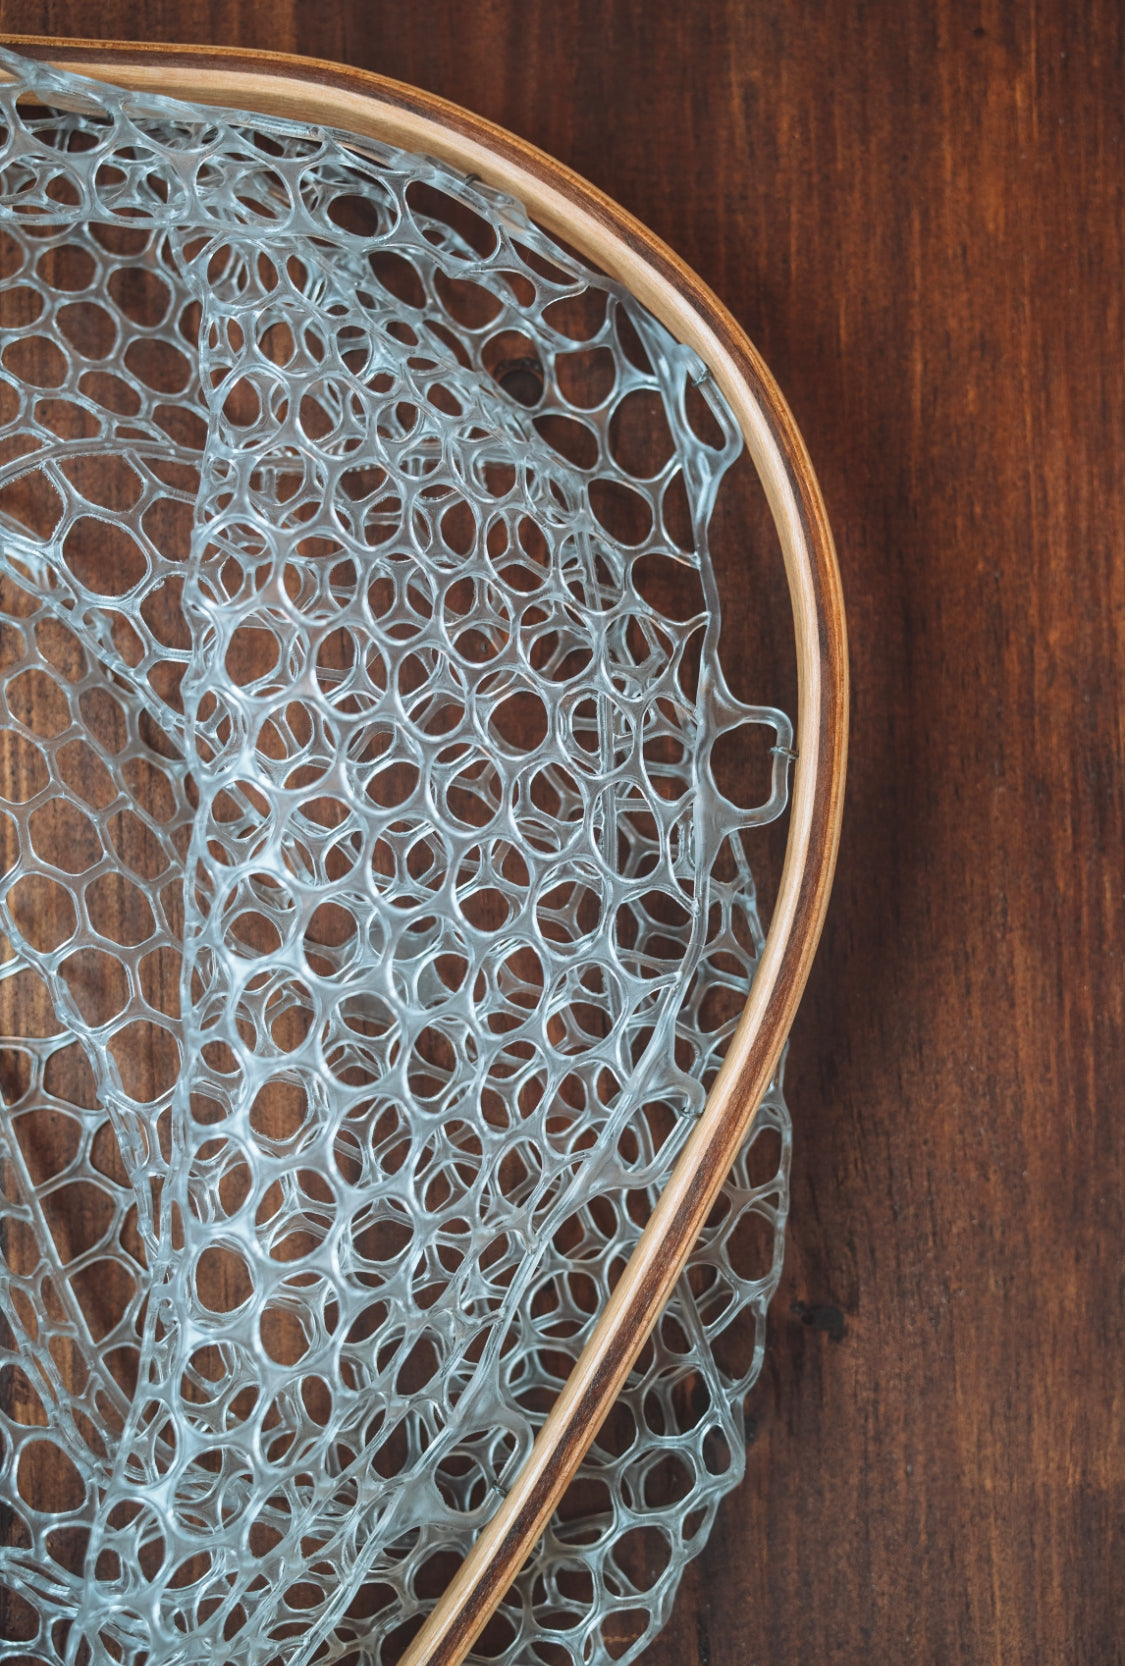 Classic Handcrafted Wood Landing Nets for Trout Fishing and Fly Fishing —  Wayward Handcrafted Fly Fishing Gear - made in Philadelphia USAWood Fly Fishing  net - Handcrafted Custom Fly Fishing net made